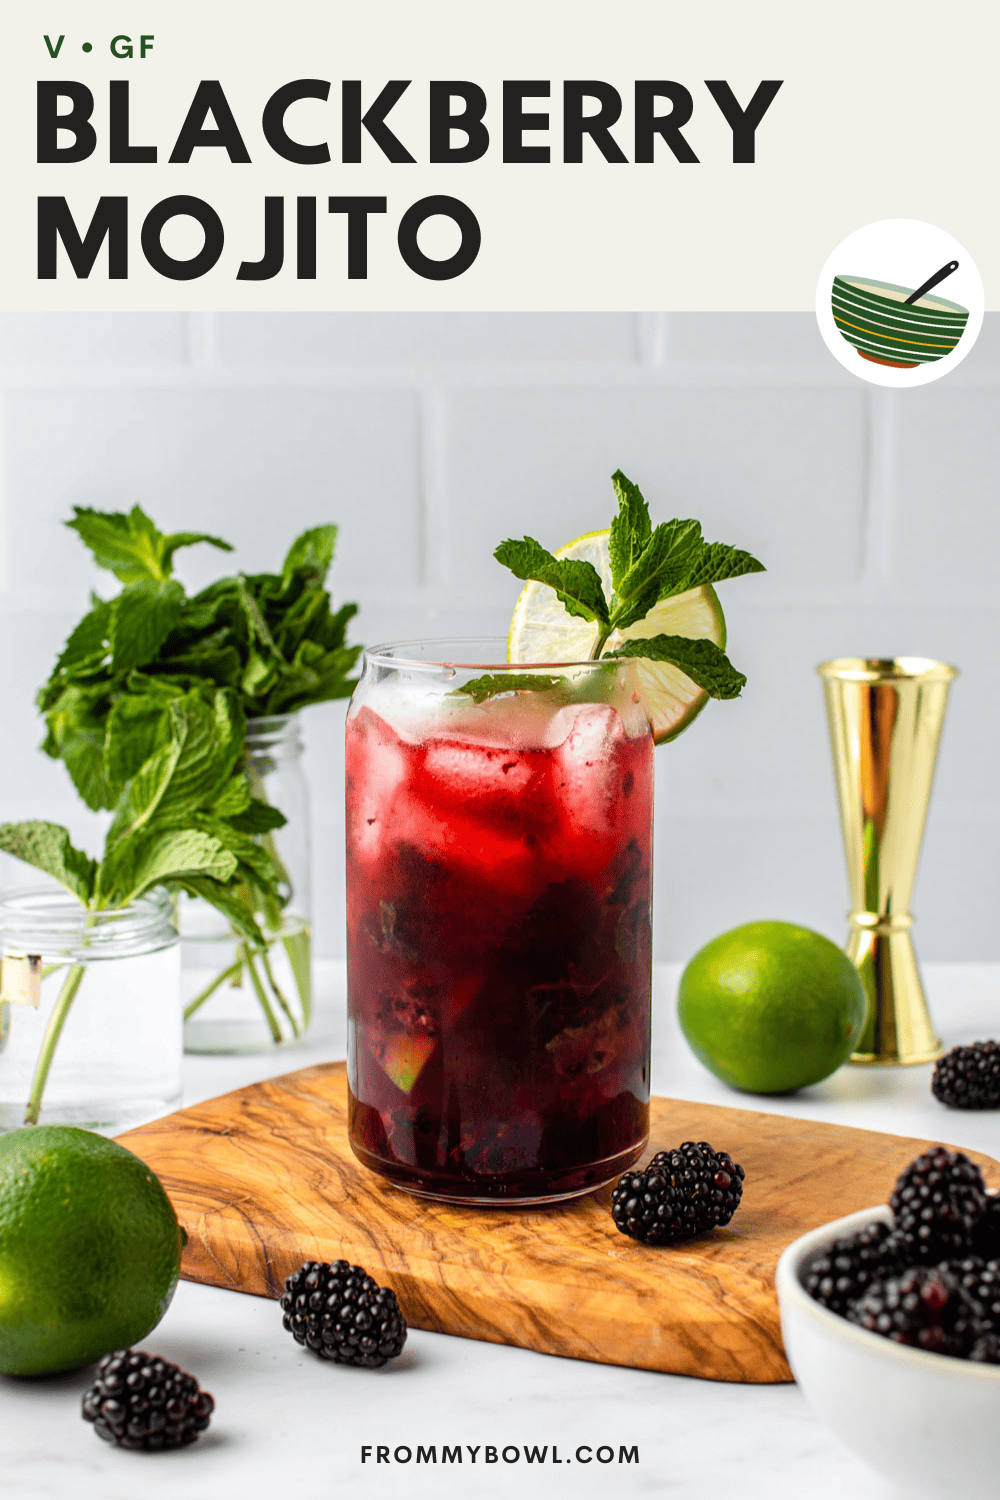 blackberry mojito served in a glass cup on a wooden board with berries, lime and fresh mint in glass jars as decoration